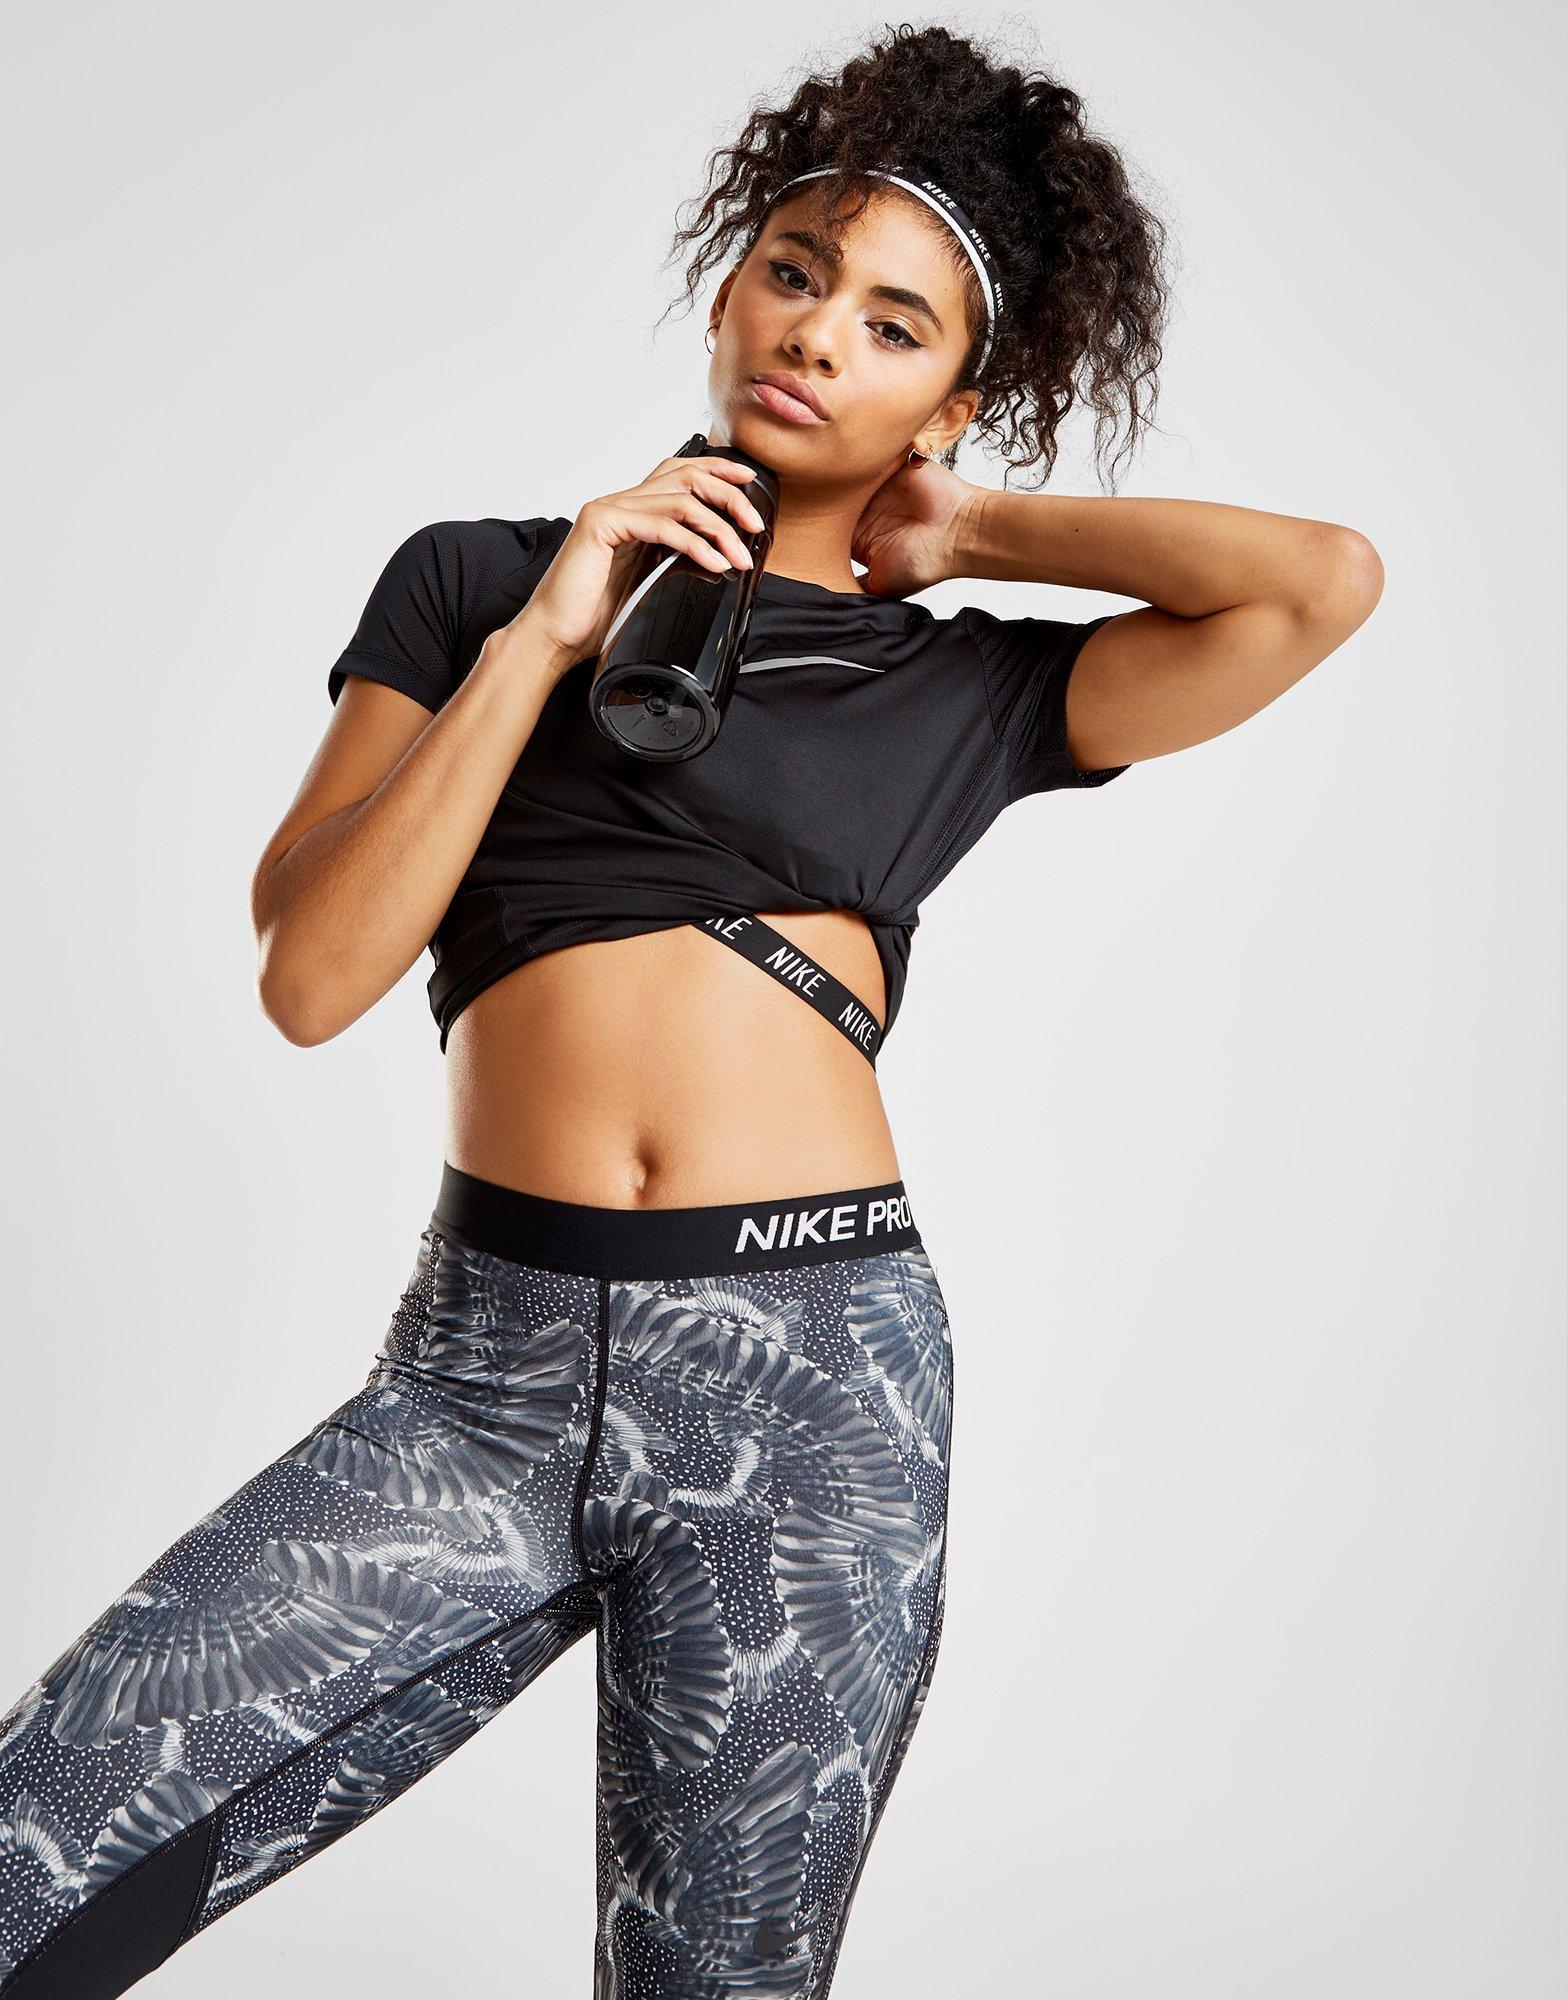 Nike Synthetic Pro Feather Print Training Leggings in Black/White (Black) -  Lyst